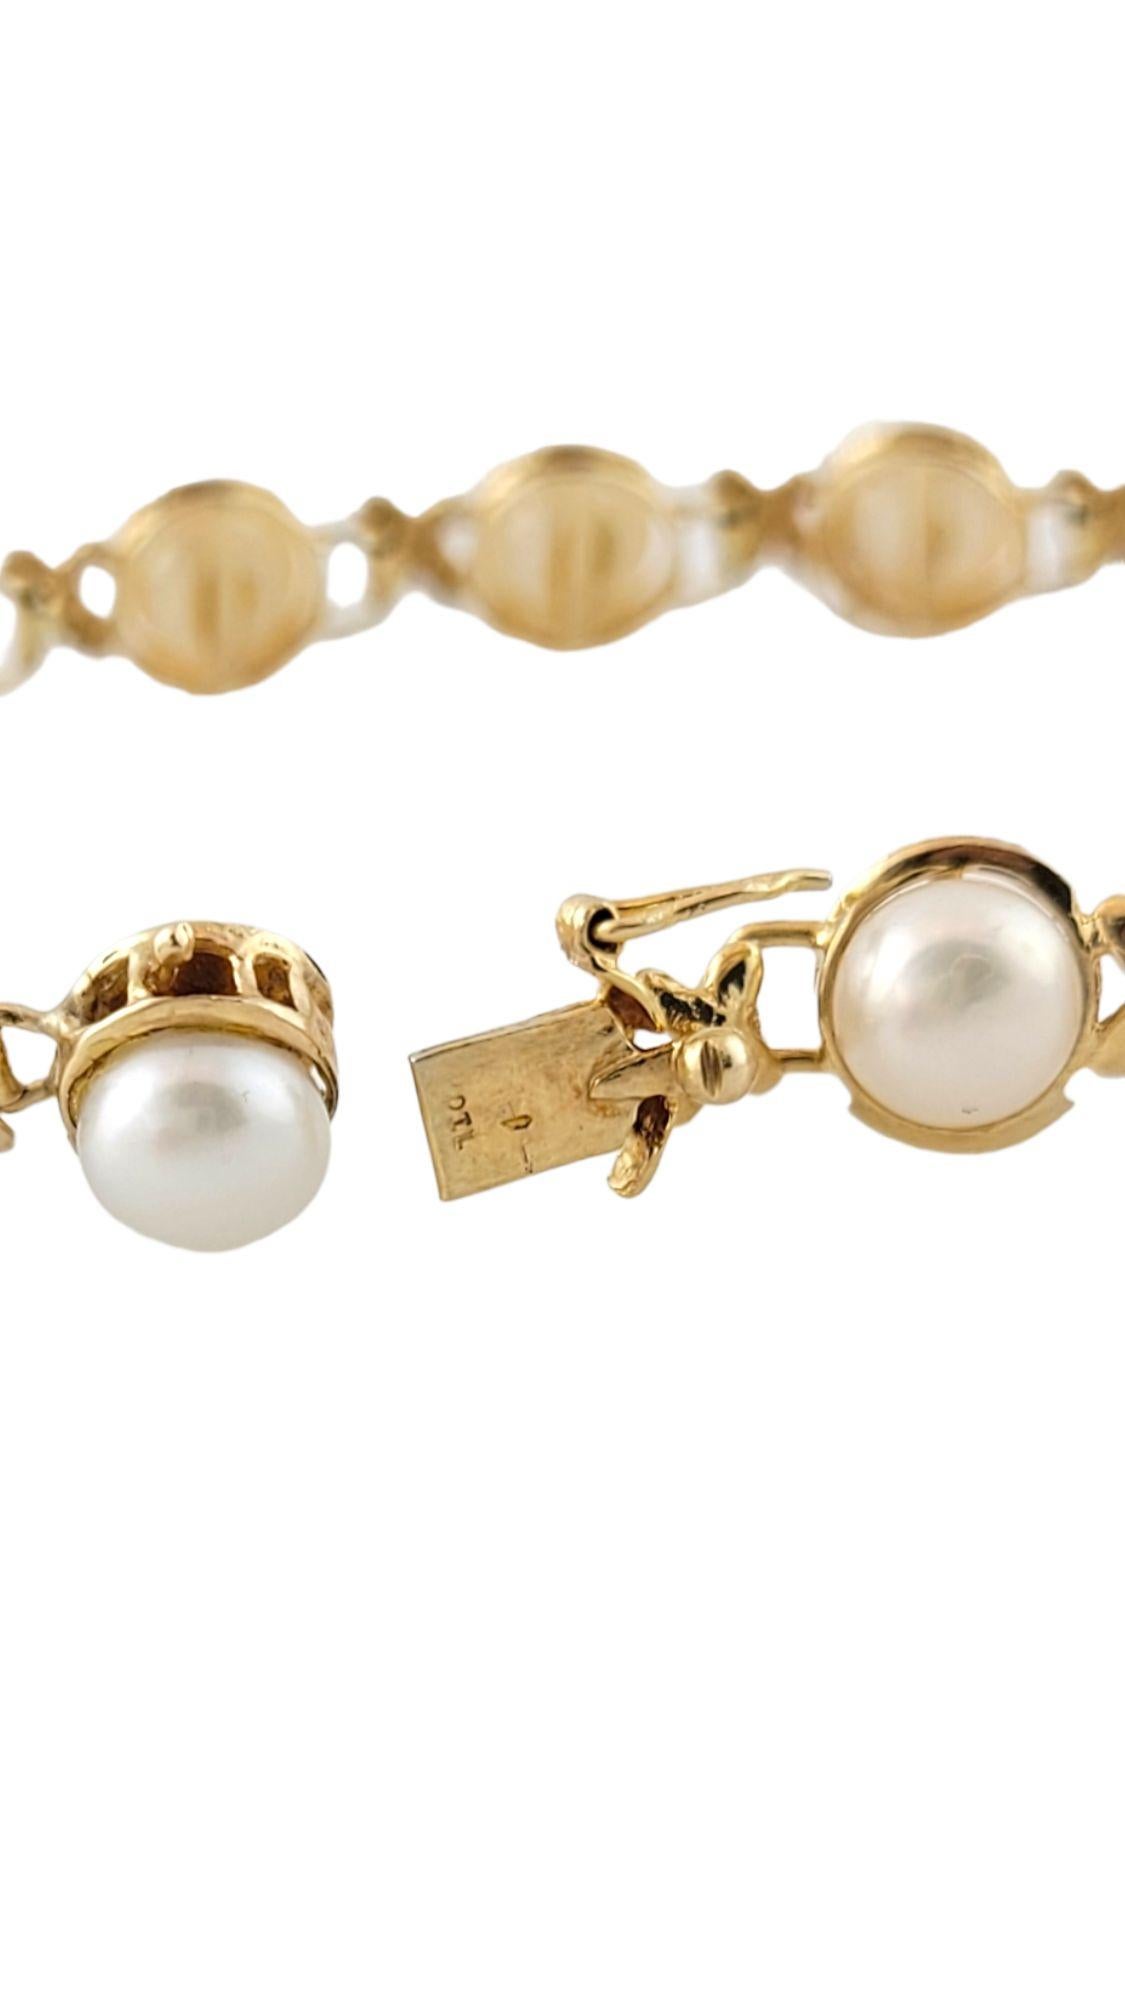 Vintage 14K Yellow Gold Freshwater Pearl Bracelet

This gorgeous 14K yellow gold bracelet is paired with 16 beautiful freshwater pearls!

Pearls: 6mm
Bracelet length: 6 3/4